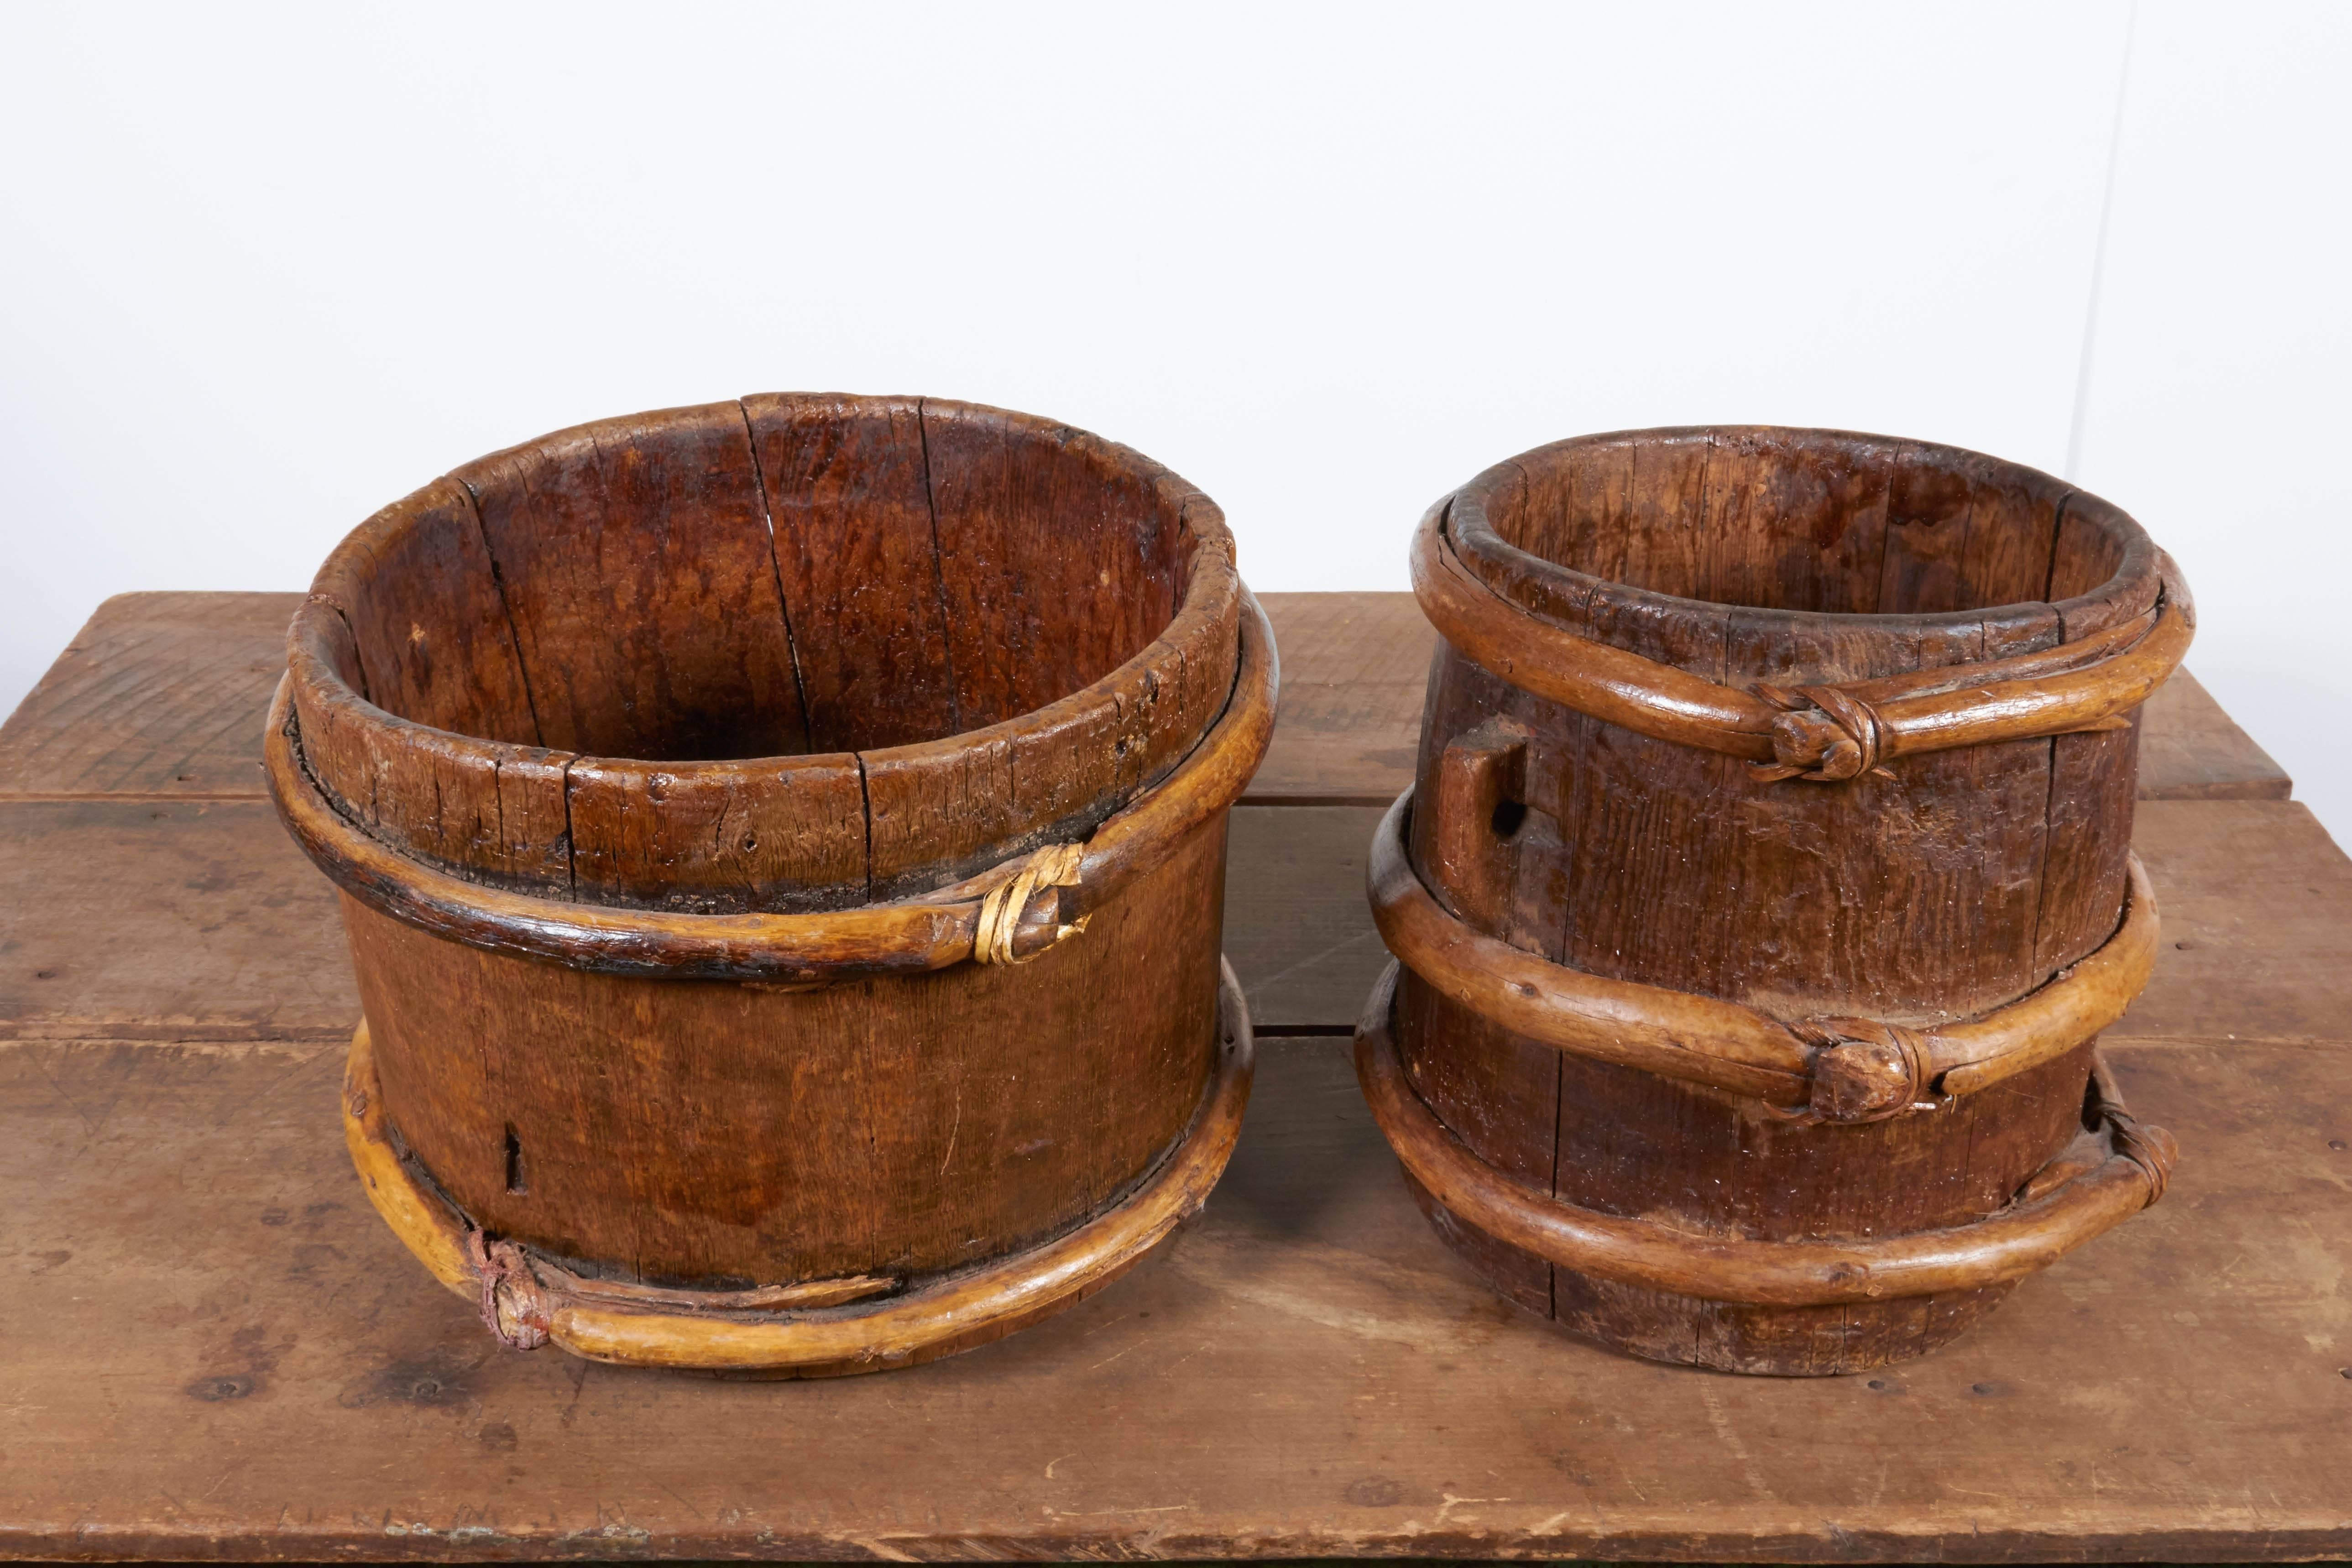 Two early 20th century Tibetan yak butter churns with terrific patina, carved handles and knotted decoration. Very useful and attractive in many settings. Priced individually. 
Dimensions: Left in main image: Diameter 14, height 10.5 Right: Diameter